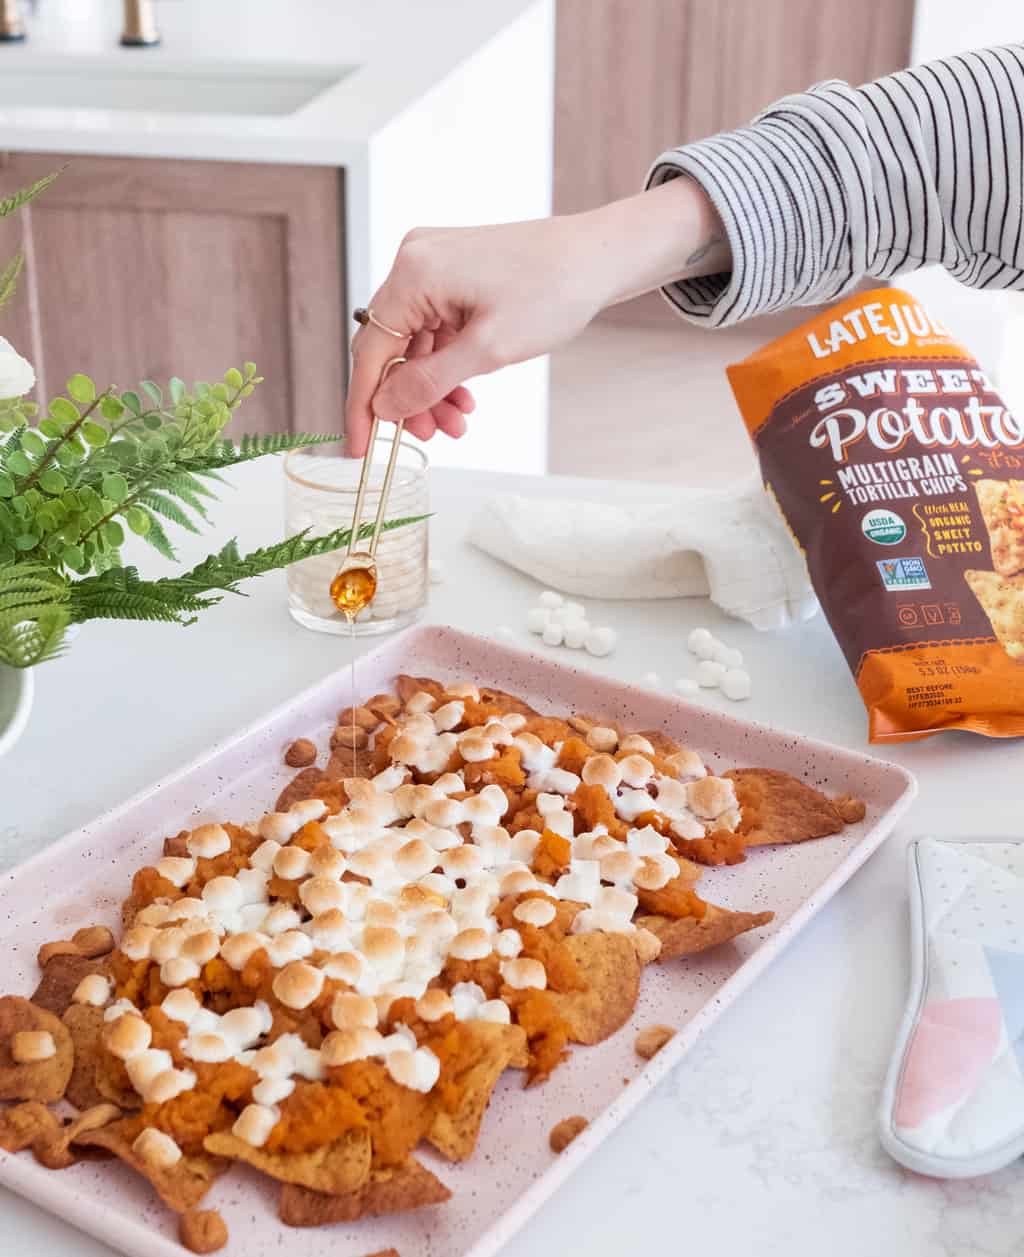 photo of the honey being drizzled on the Sweet Potato Nachos Recipe With Late July Tortilla Chips by top Houston lifestyle blogger Ashley Rose of Sugar & Cloth